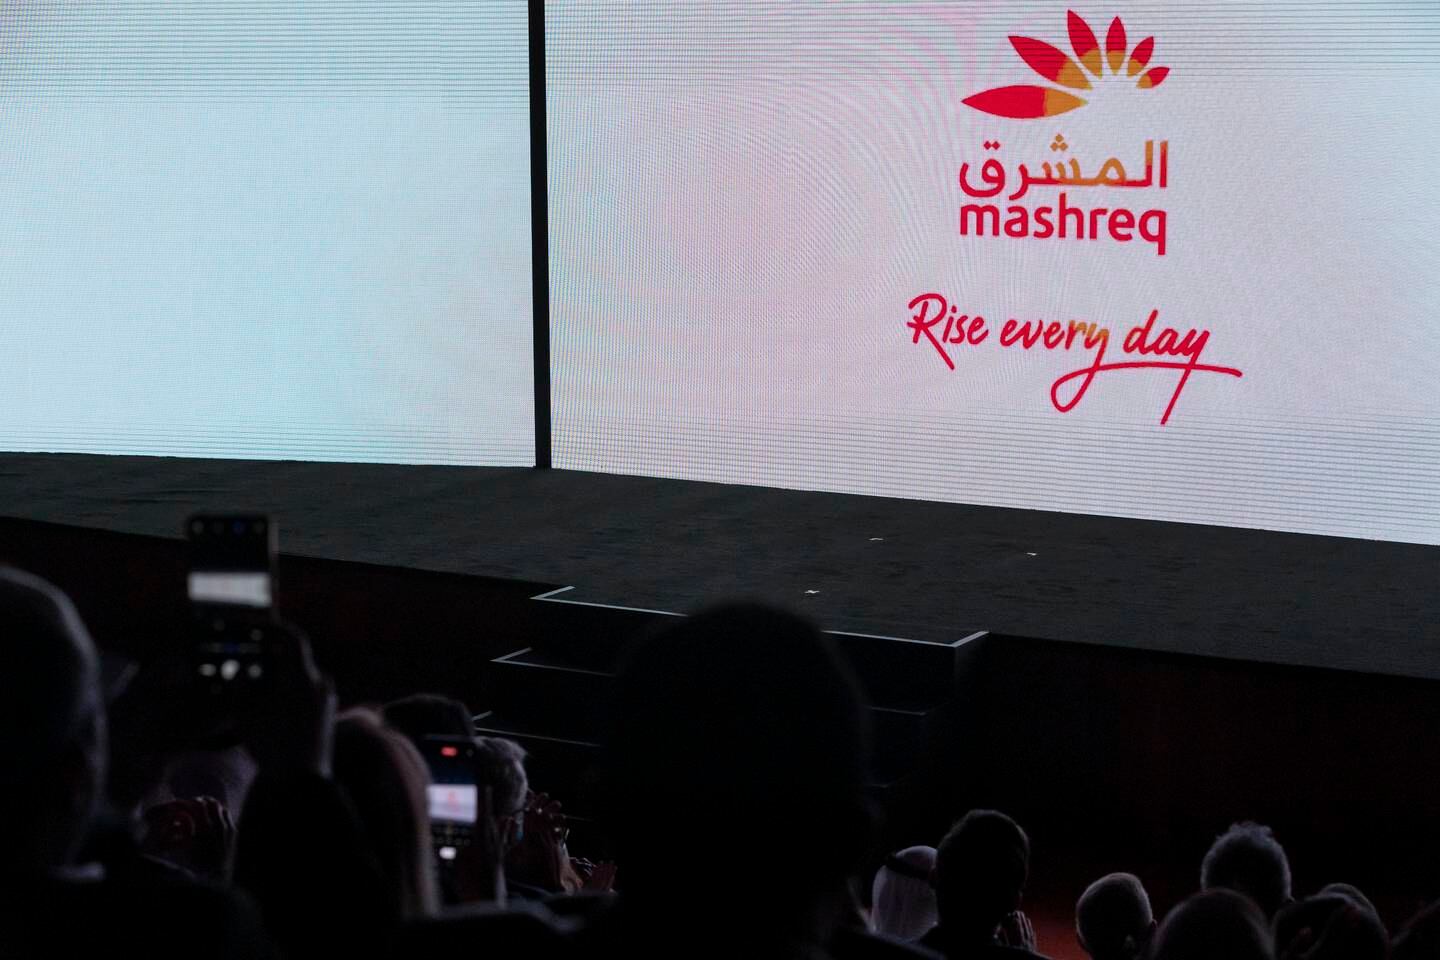 Unveiling of the new brand strategy of Mashreq Group, 'Rise every day'.
Antonie Robertson / The National
